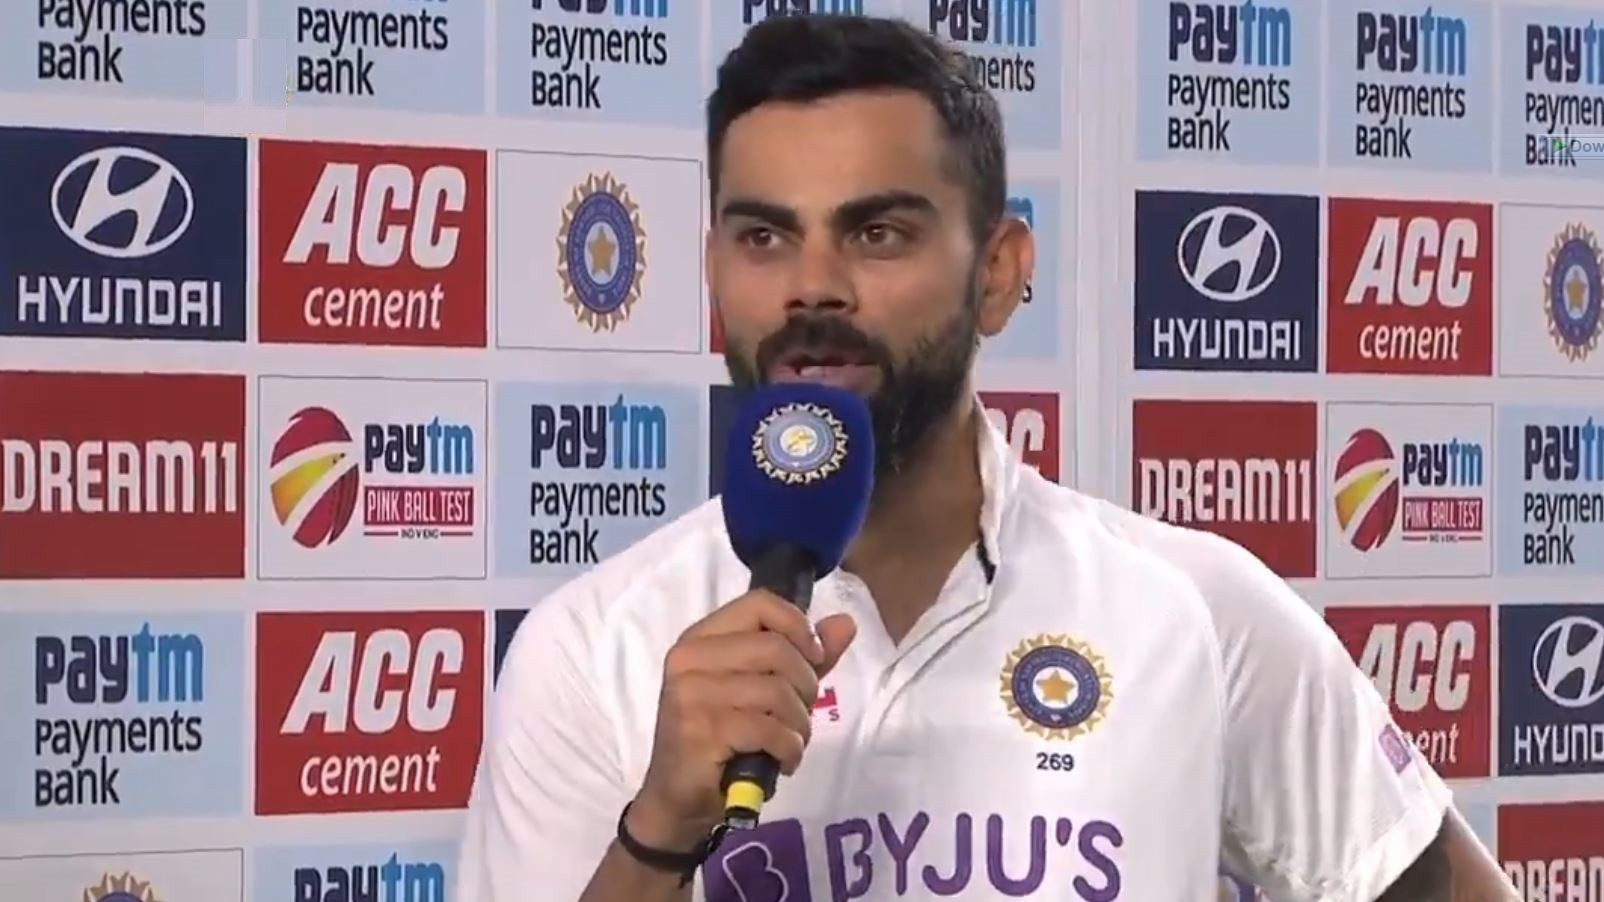 IND v ENG 2021: “I don't think the quality of batting was up to standards,” Virat Kohli says after India’s 10-wicket win in 3rd Test